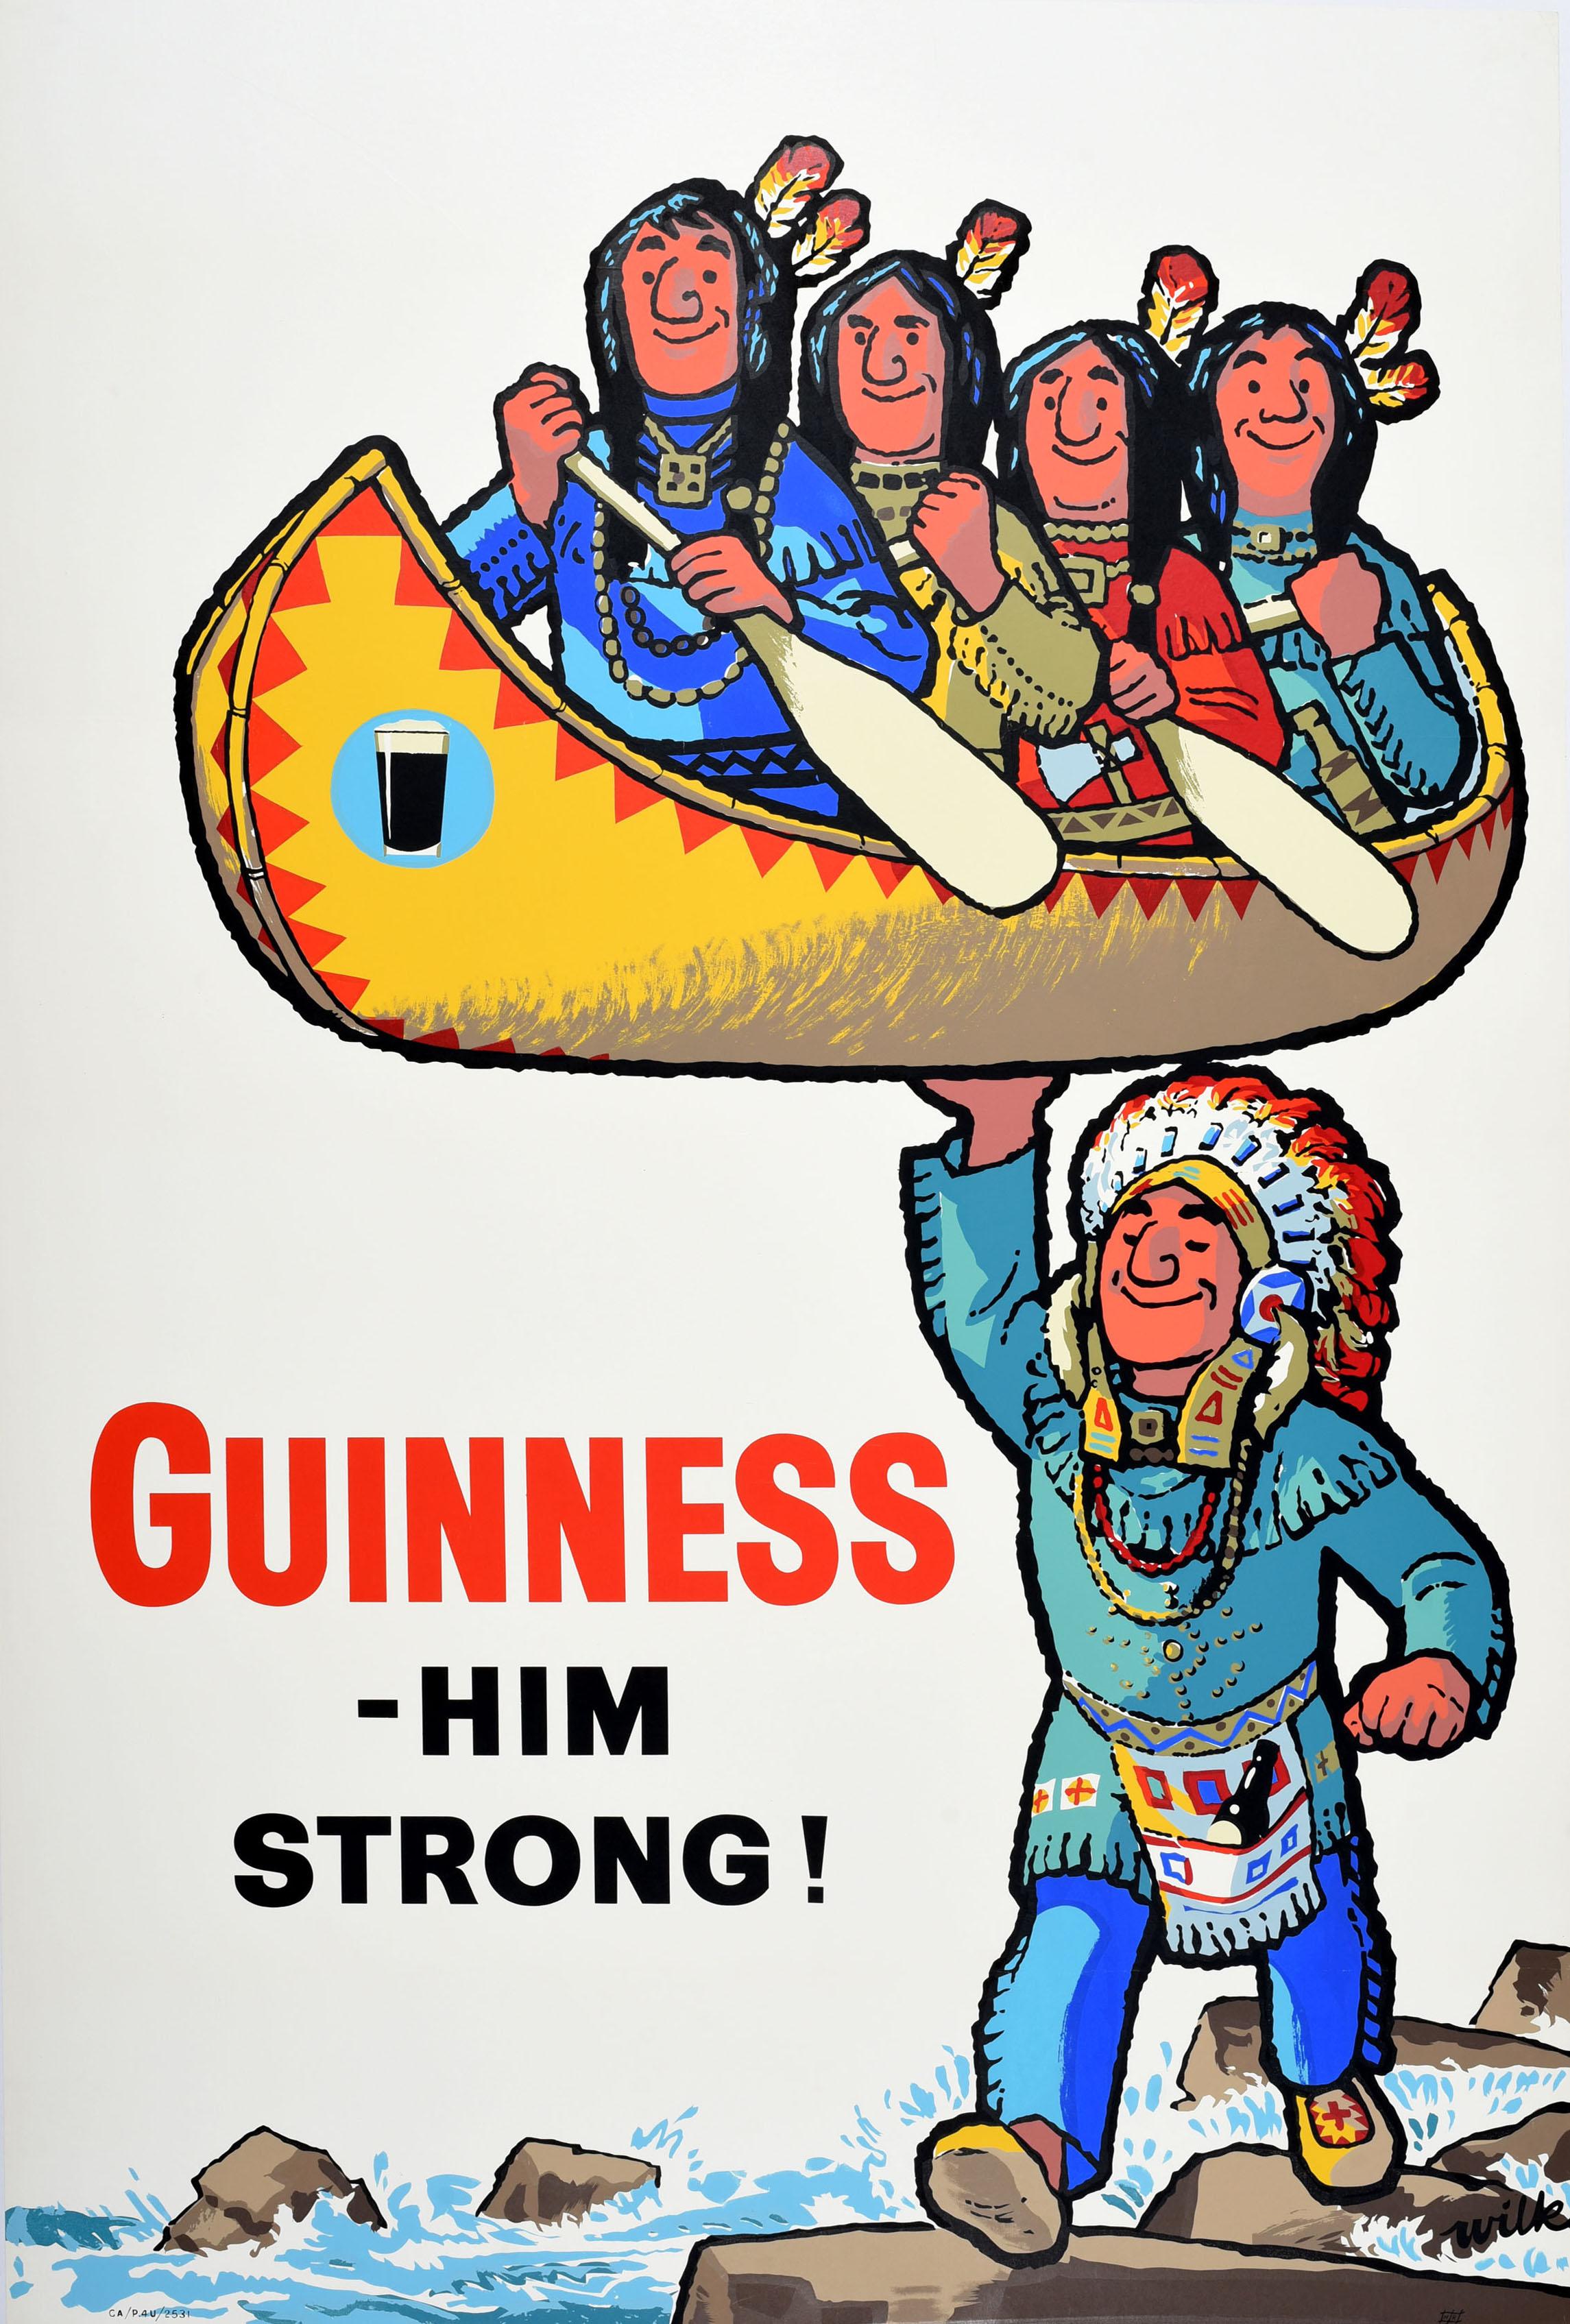 Unknown Print - Original Vintage Advertising Poster Guinness Him Strong Native American Canoe